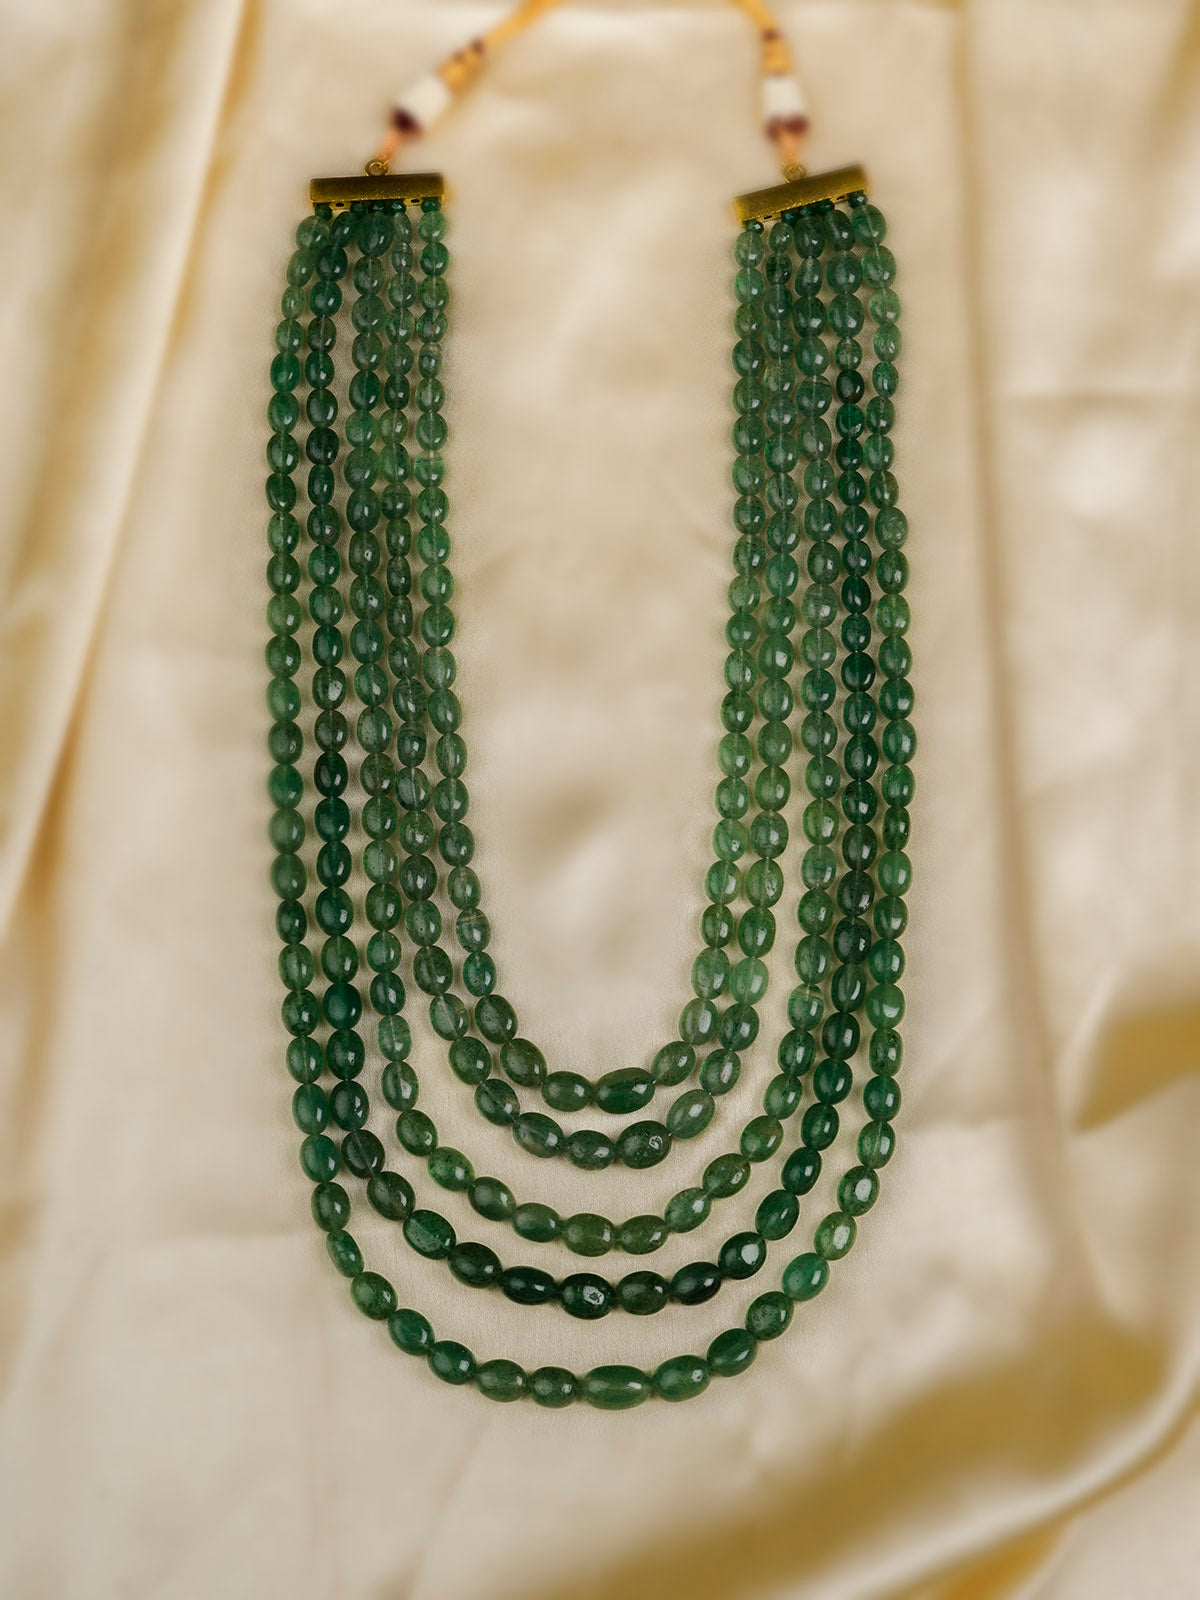 MN426 - Green Color Necklace/Mala